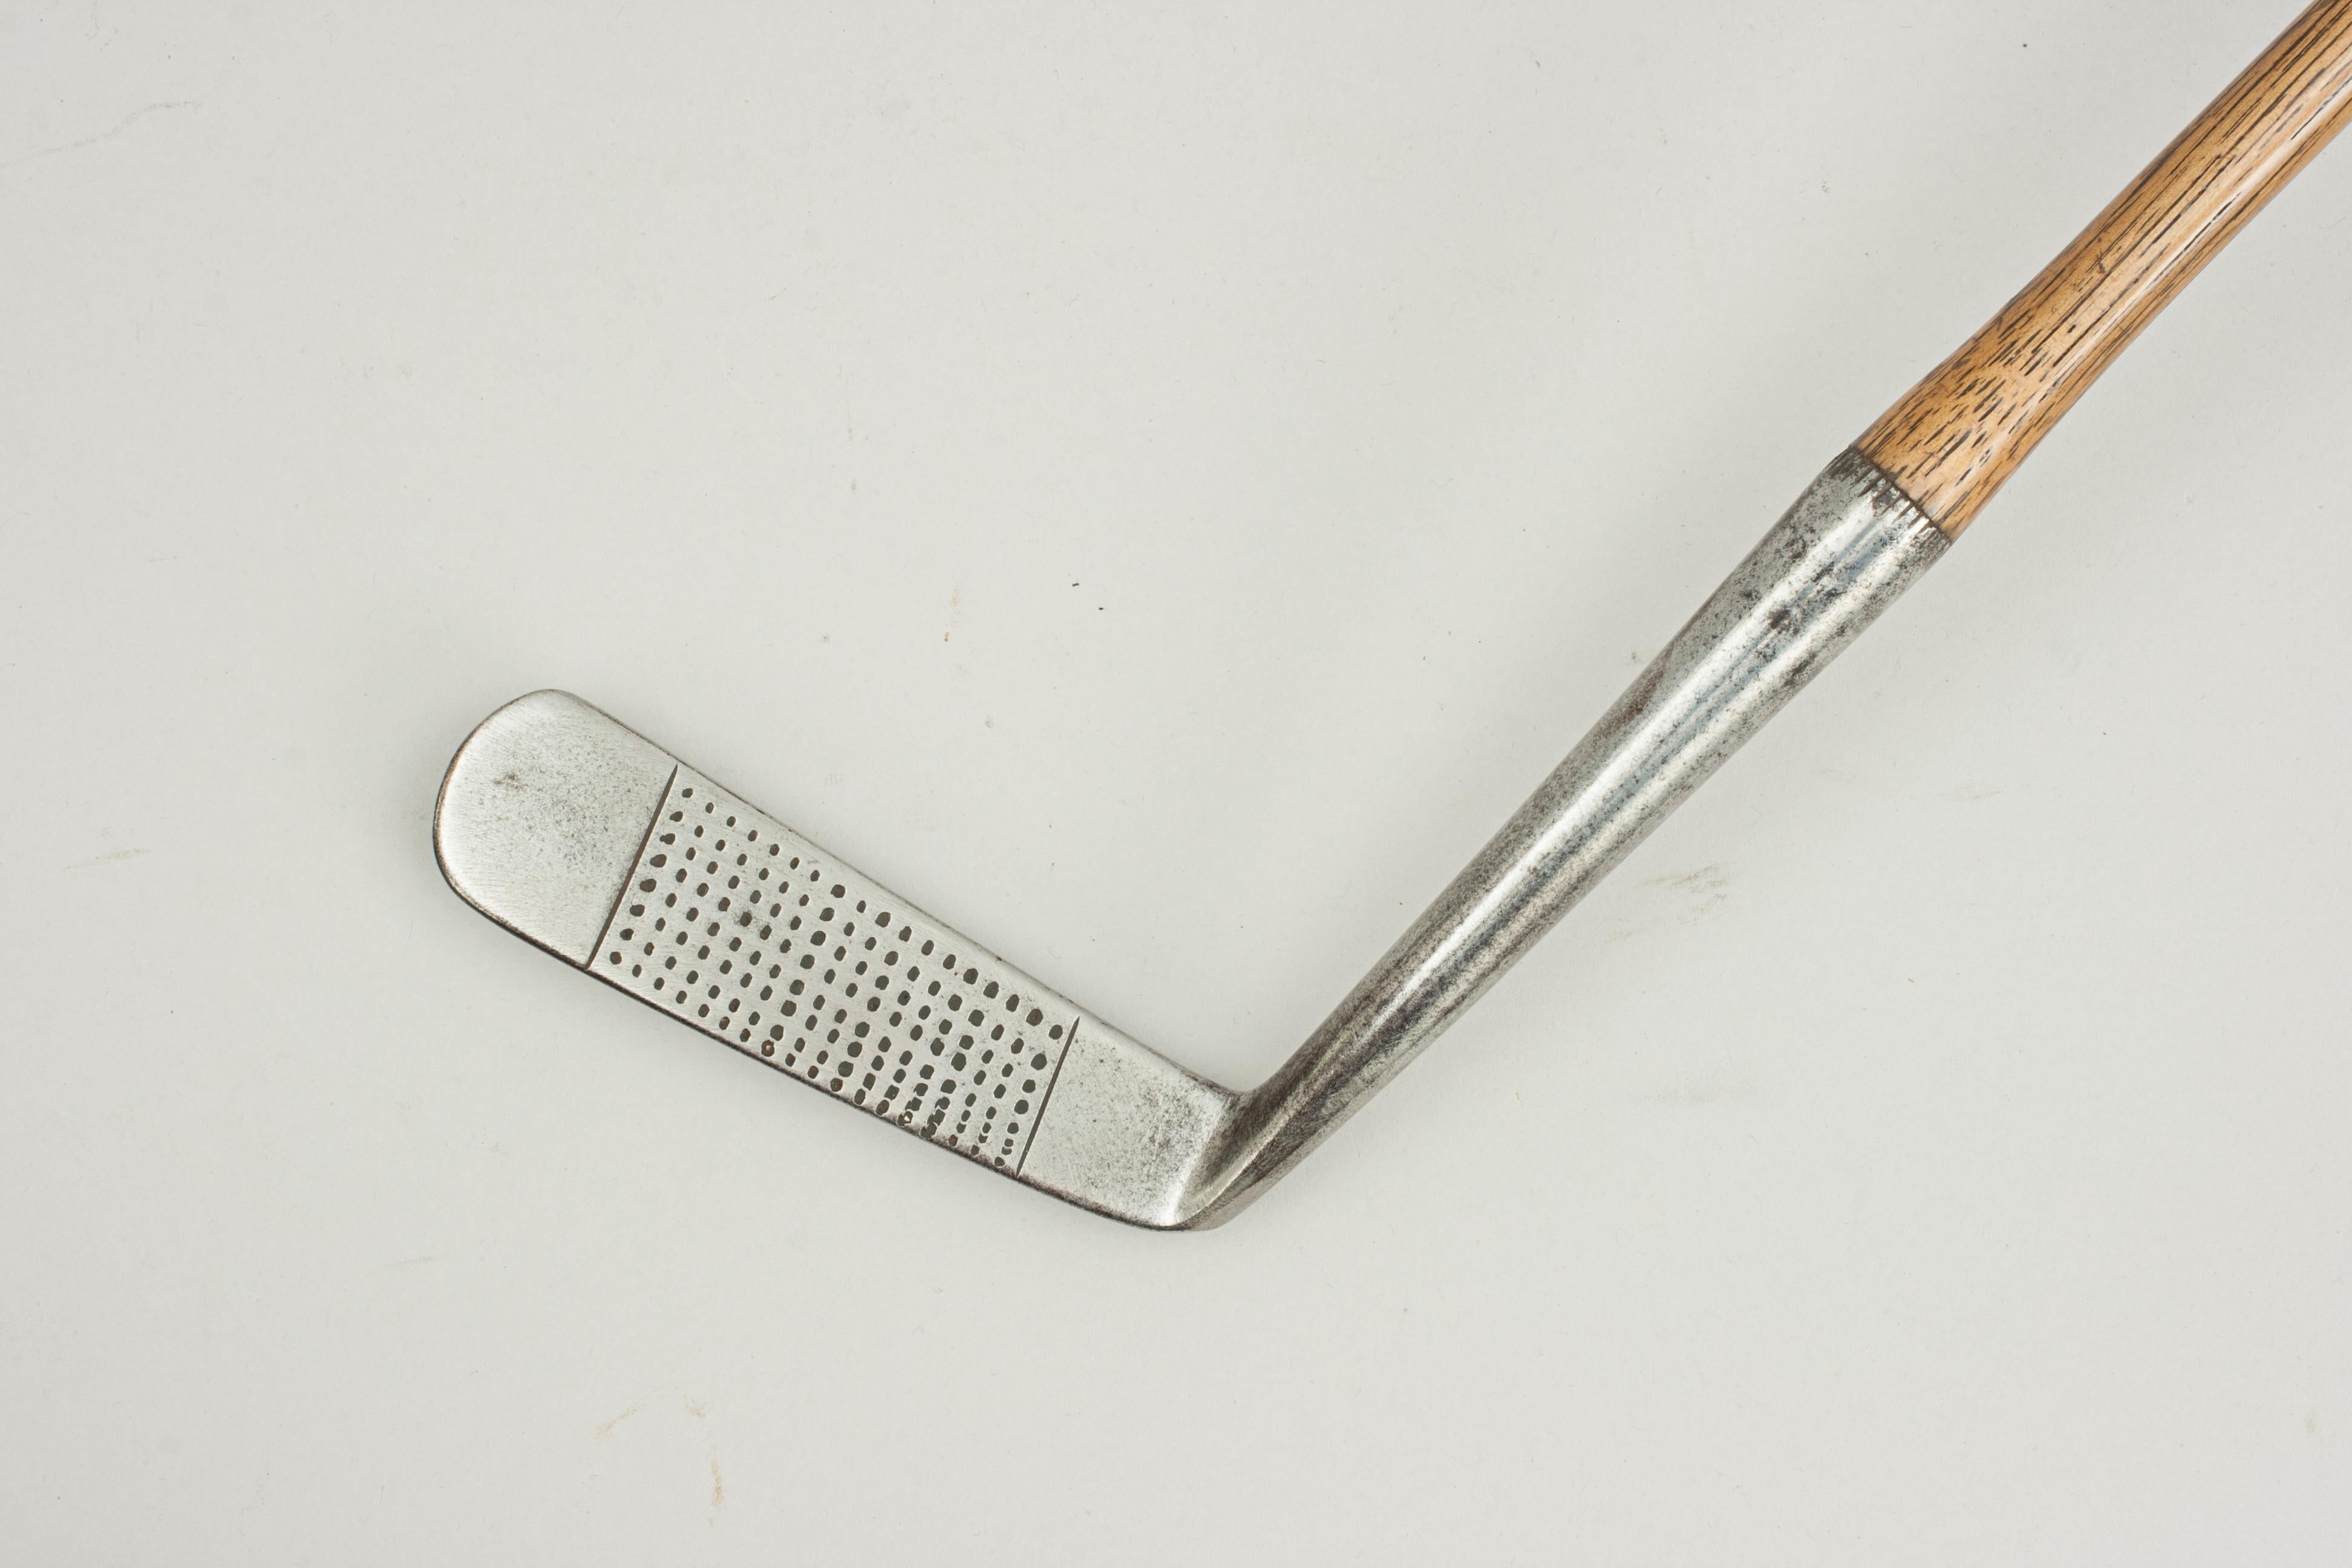 Steel Vintage Golf Club, Putter by Cann & Taylor with J.h Taylor Autograph